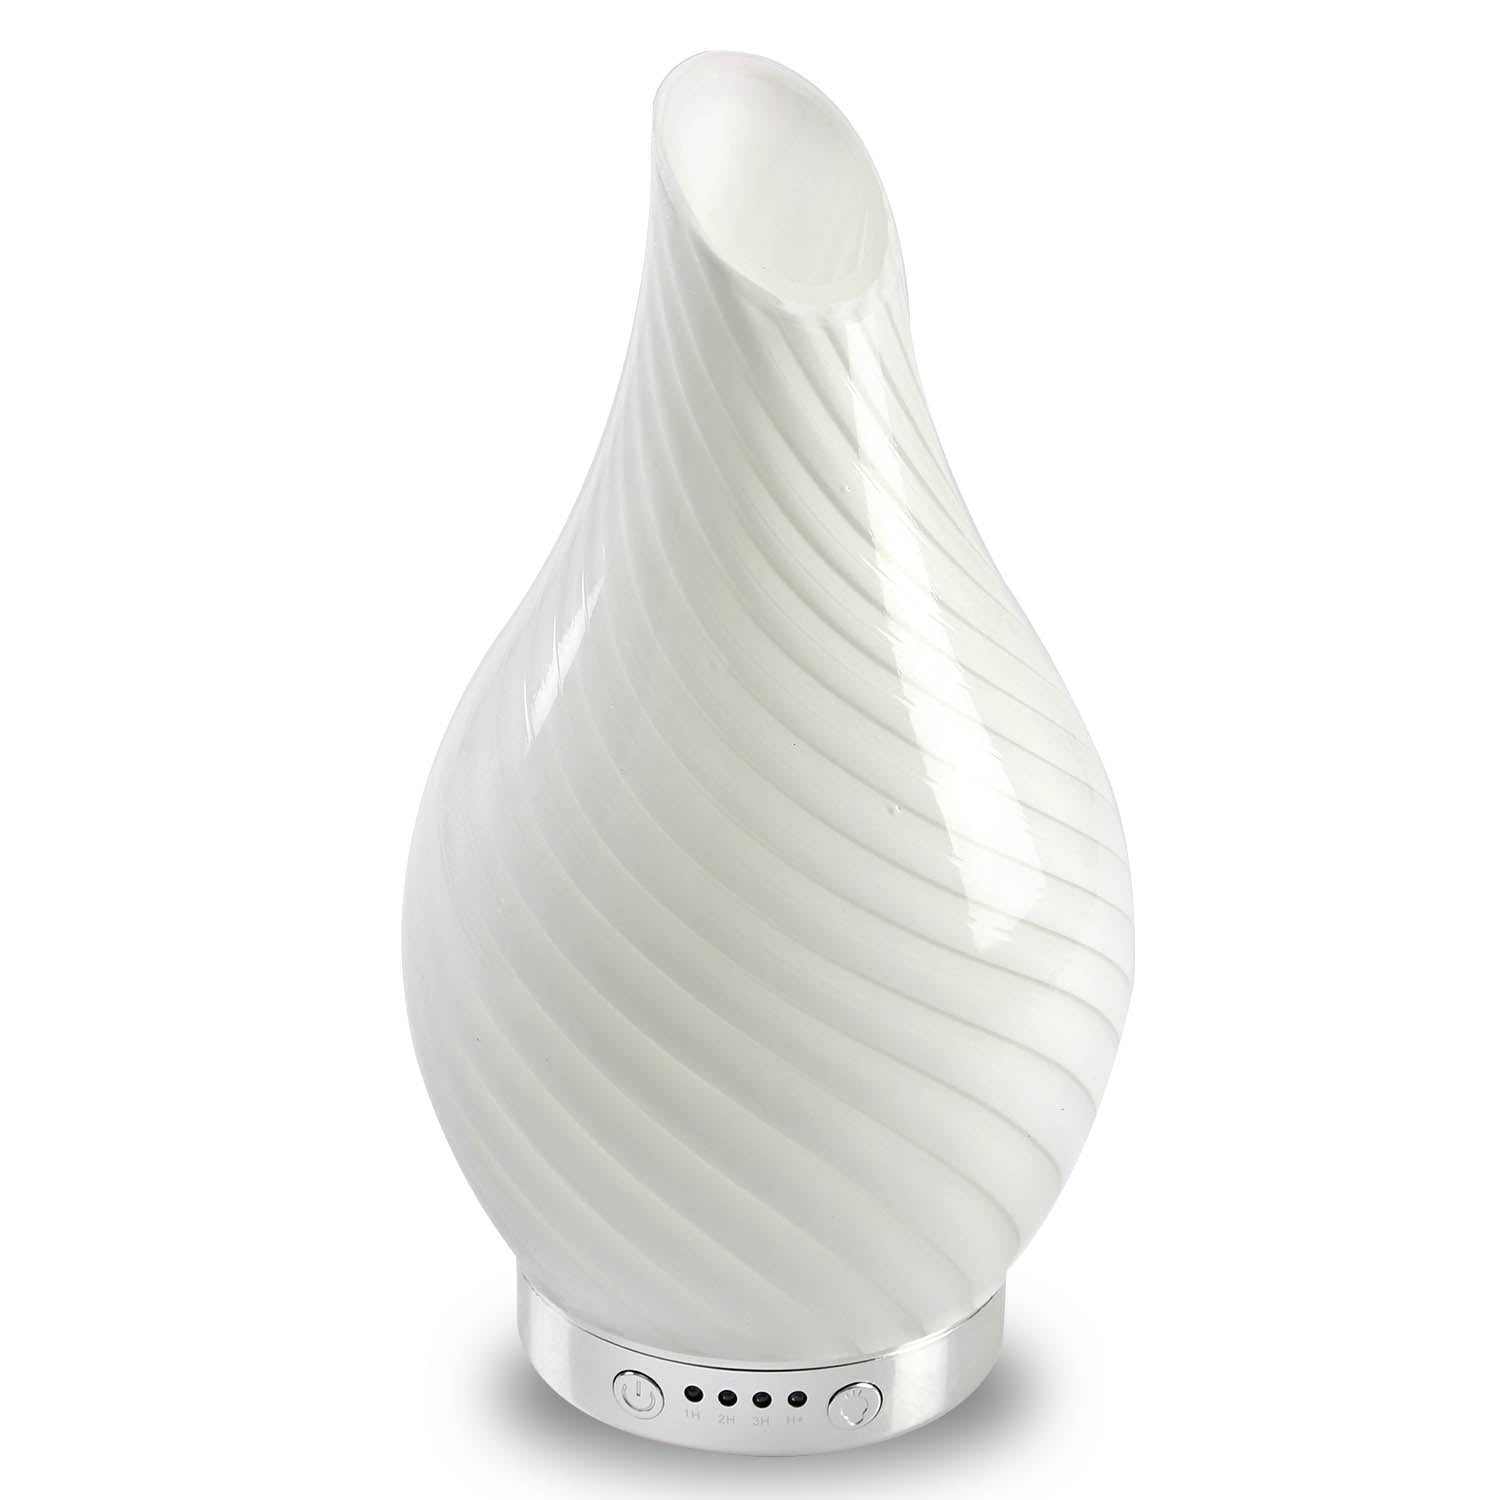 Desire Aroma Humidifier Colour Changing Lamp - Swirl